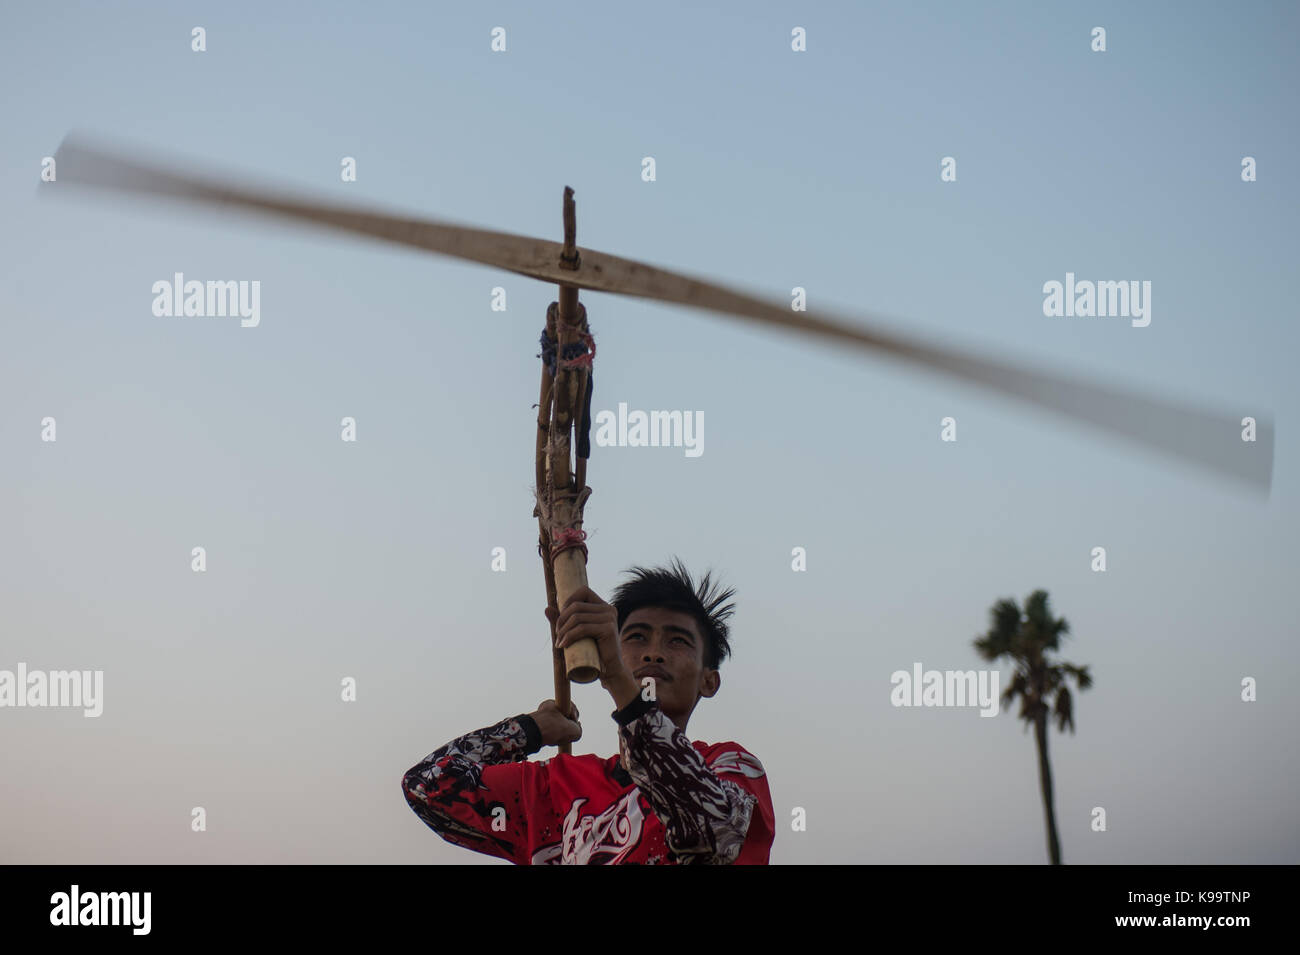 Pandeglang, Indonesia. 22nd Sep, 2017. A man tests his windmill during traditional windmill festival at Tanjung Lesung, Pandeglang district, Banten Province in Indonesia, Sept. 22, 2017. Credit: Veri Sanovri) (zjy/Xinhua/Alamy Live News Stock Photo